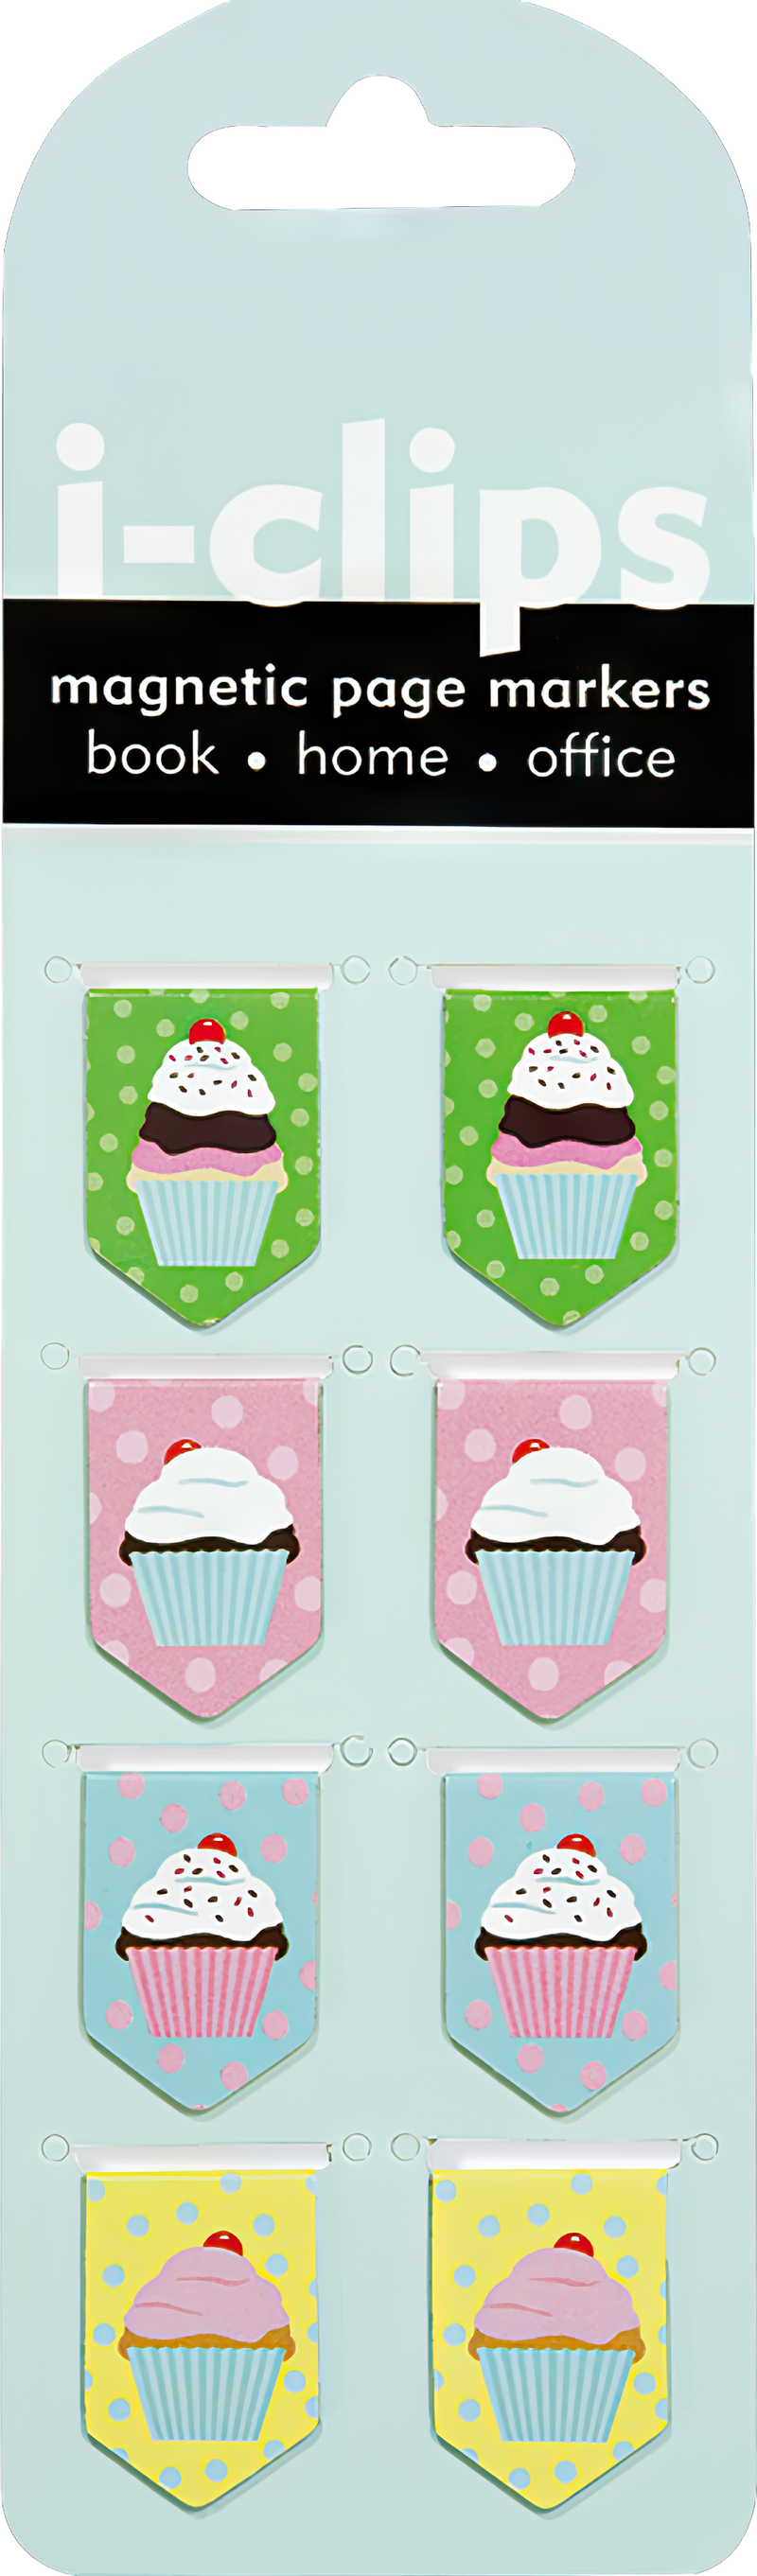 Cupcakes i-clips Magnetic Page Markers